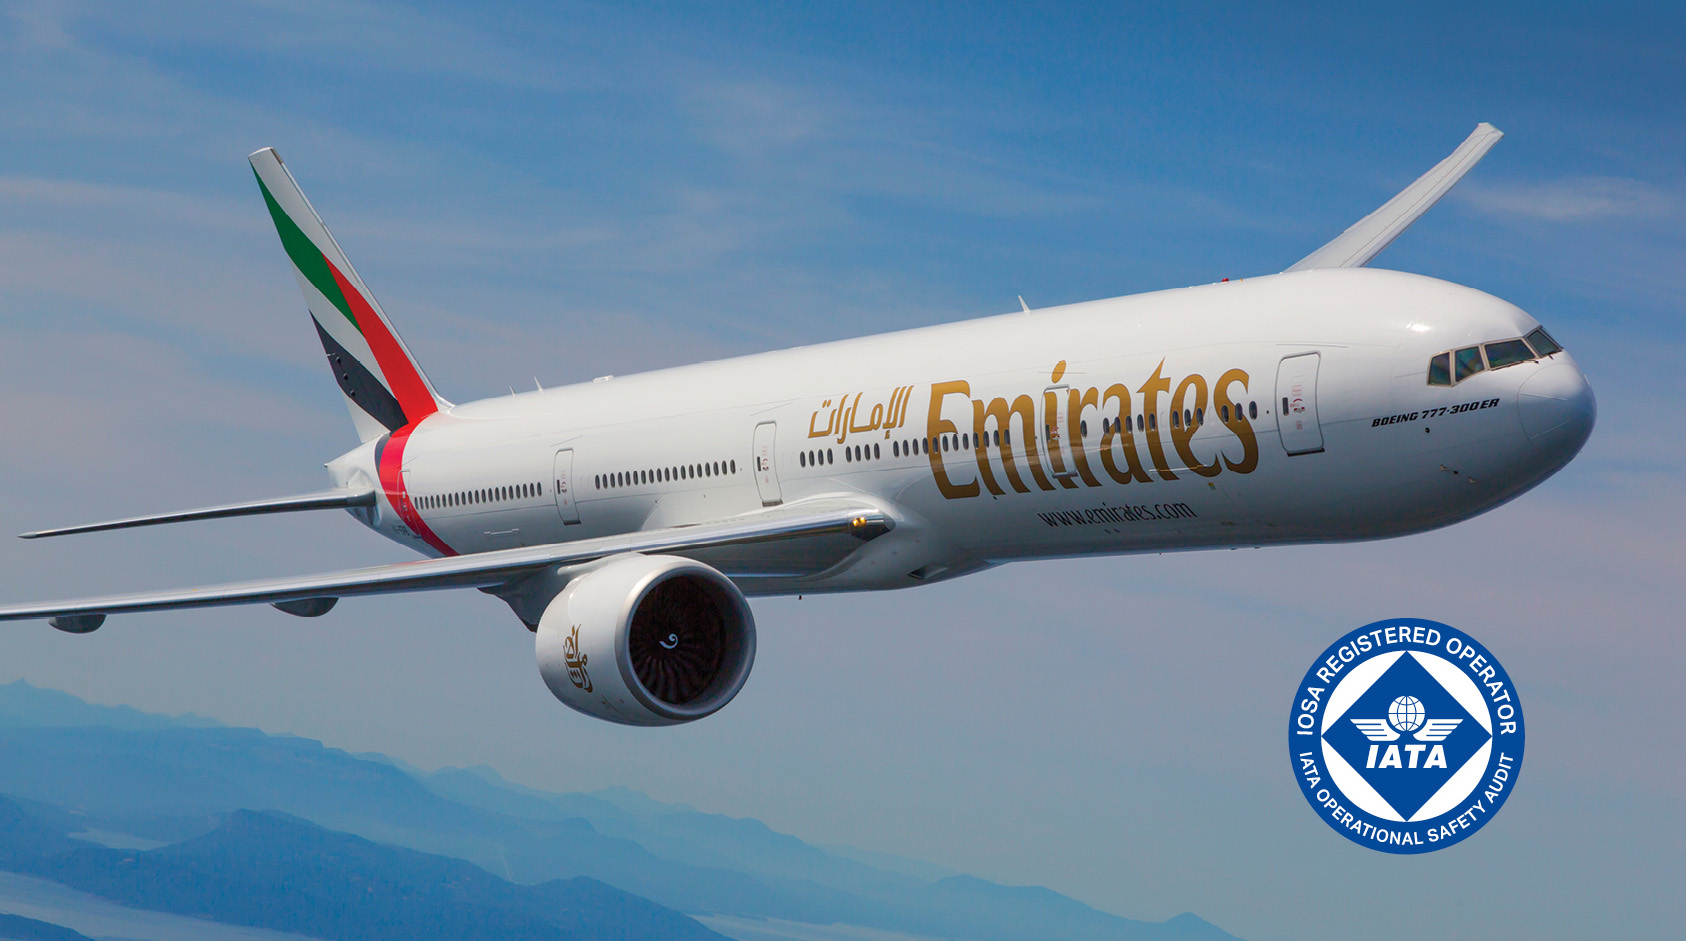 An Emirates Airbus in flight with IATA logo